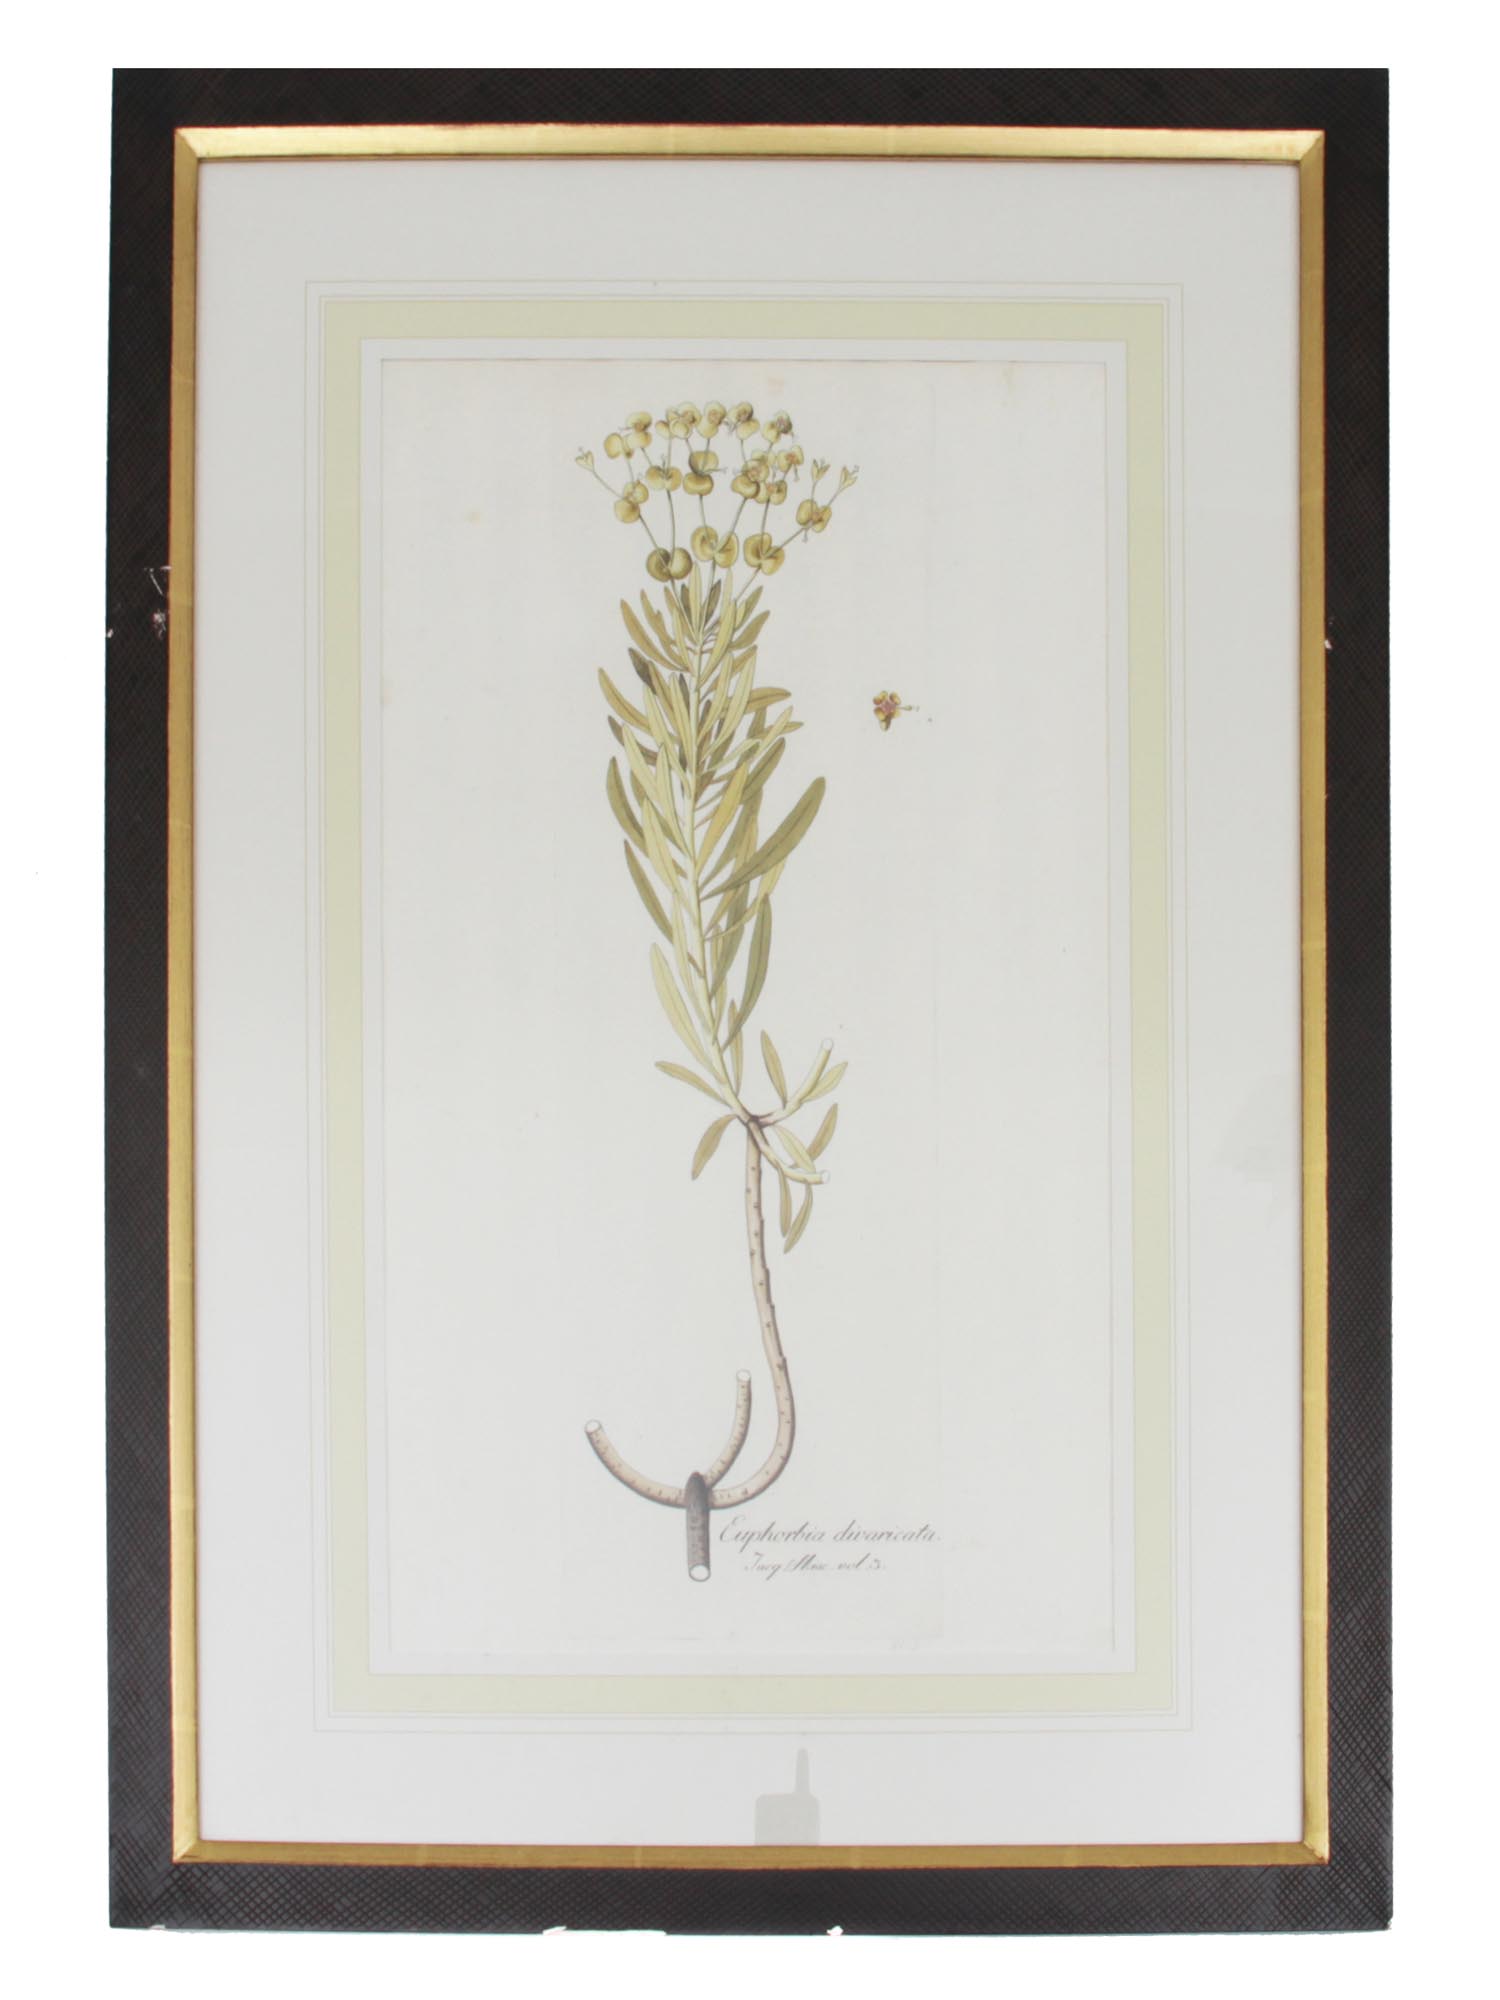 A HAND-COLORED ETCHING OF A BOTANICAL DRAWING PIC-0